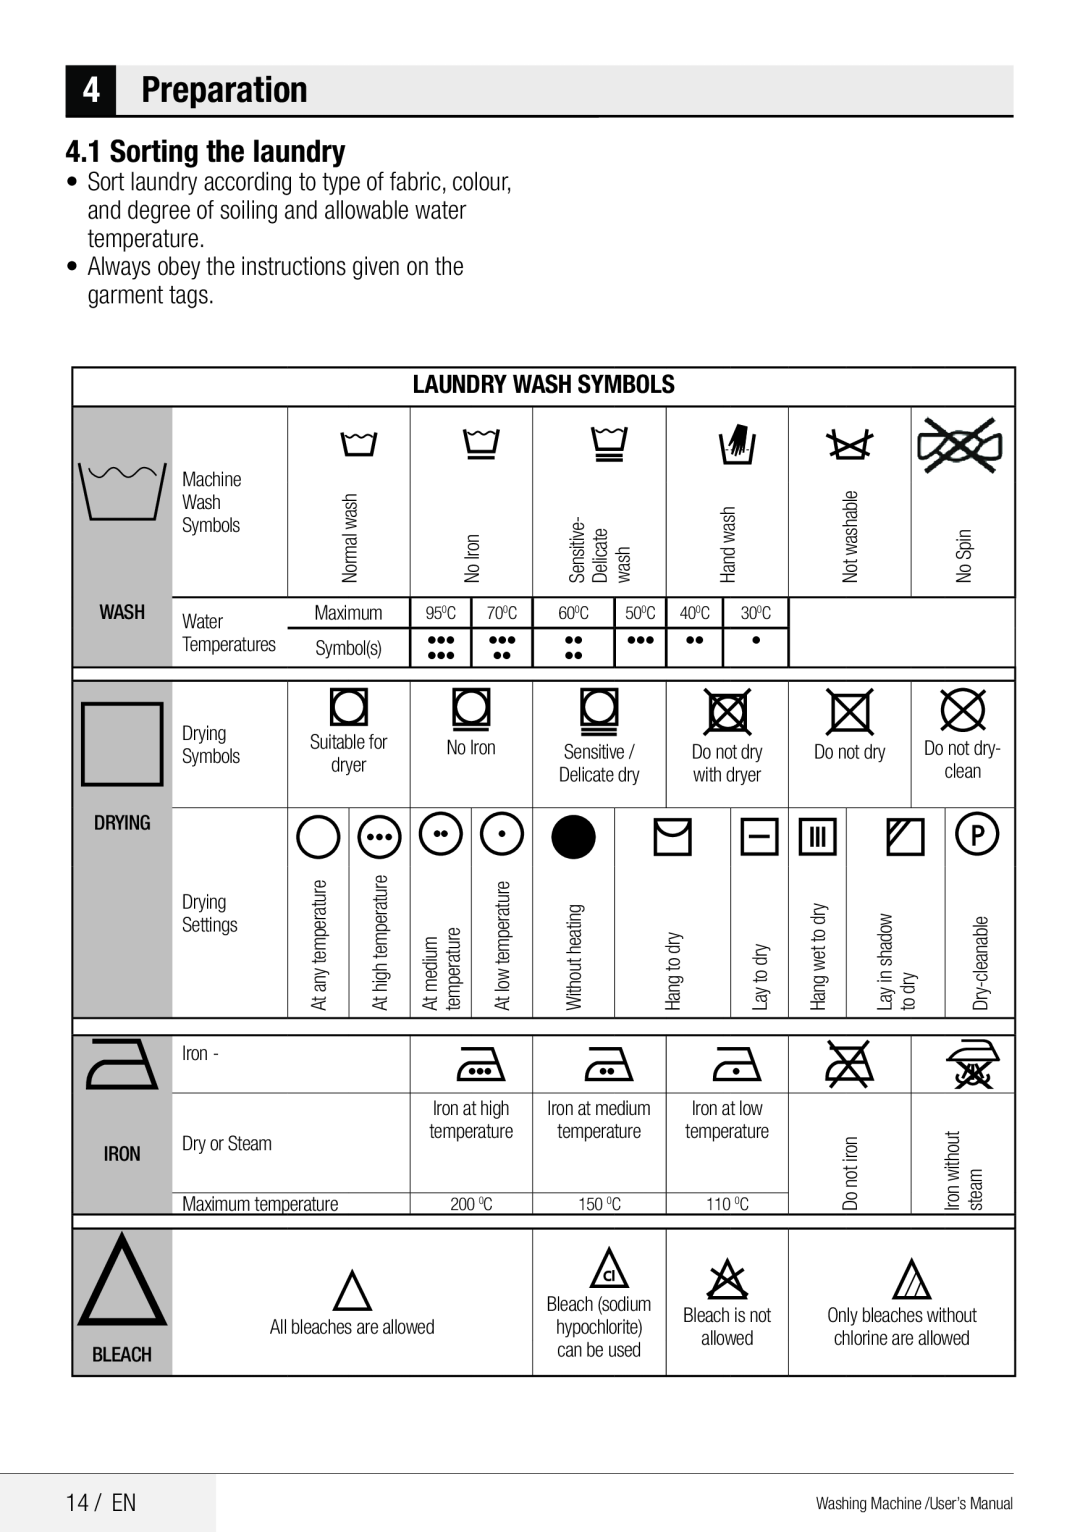 Blomberg WNF 8441 AE20 Preparation, Sorting the laundry, Always obey the instructions given on the garment tags, 14 / EN 